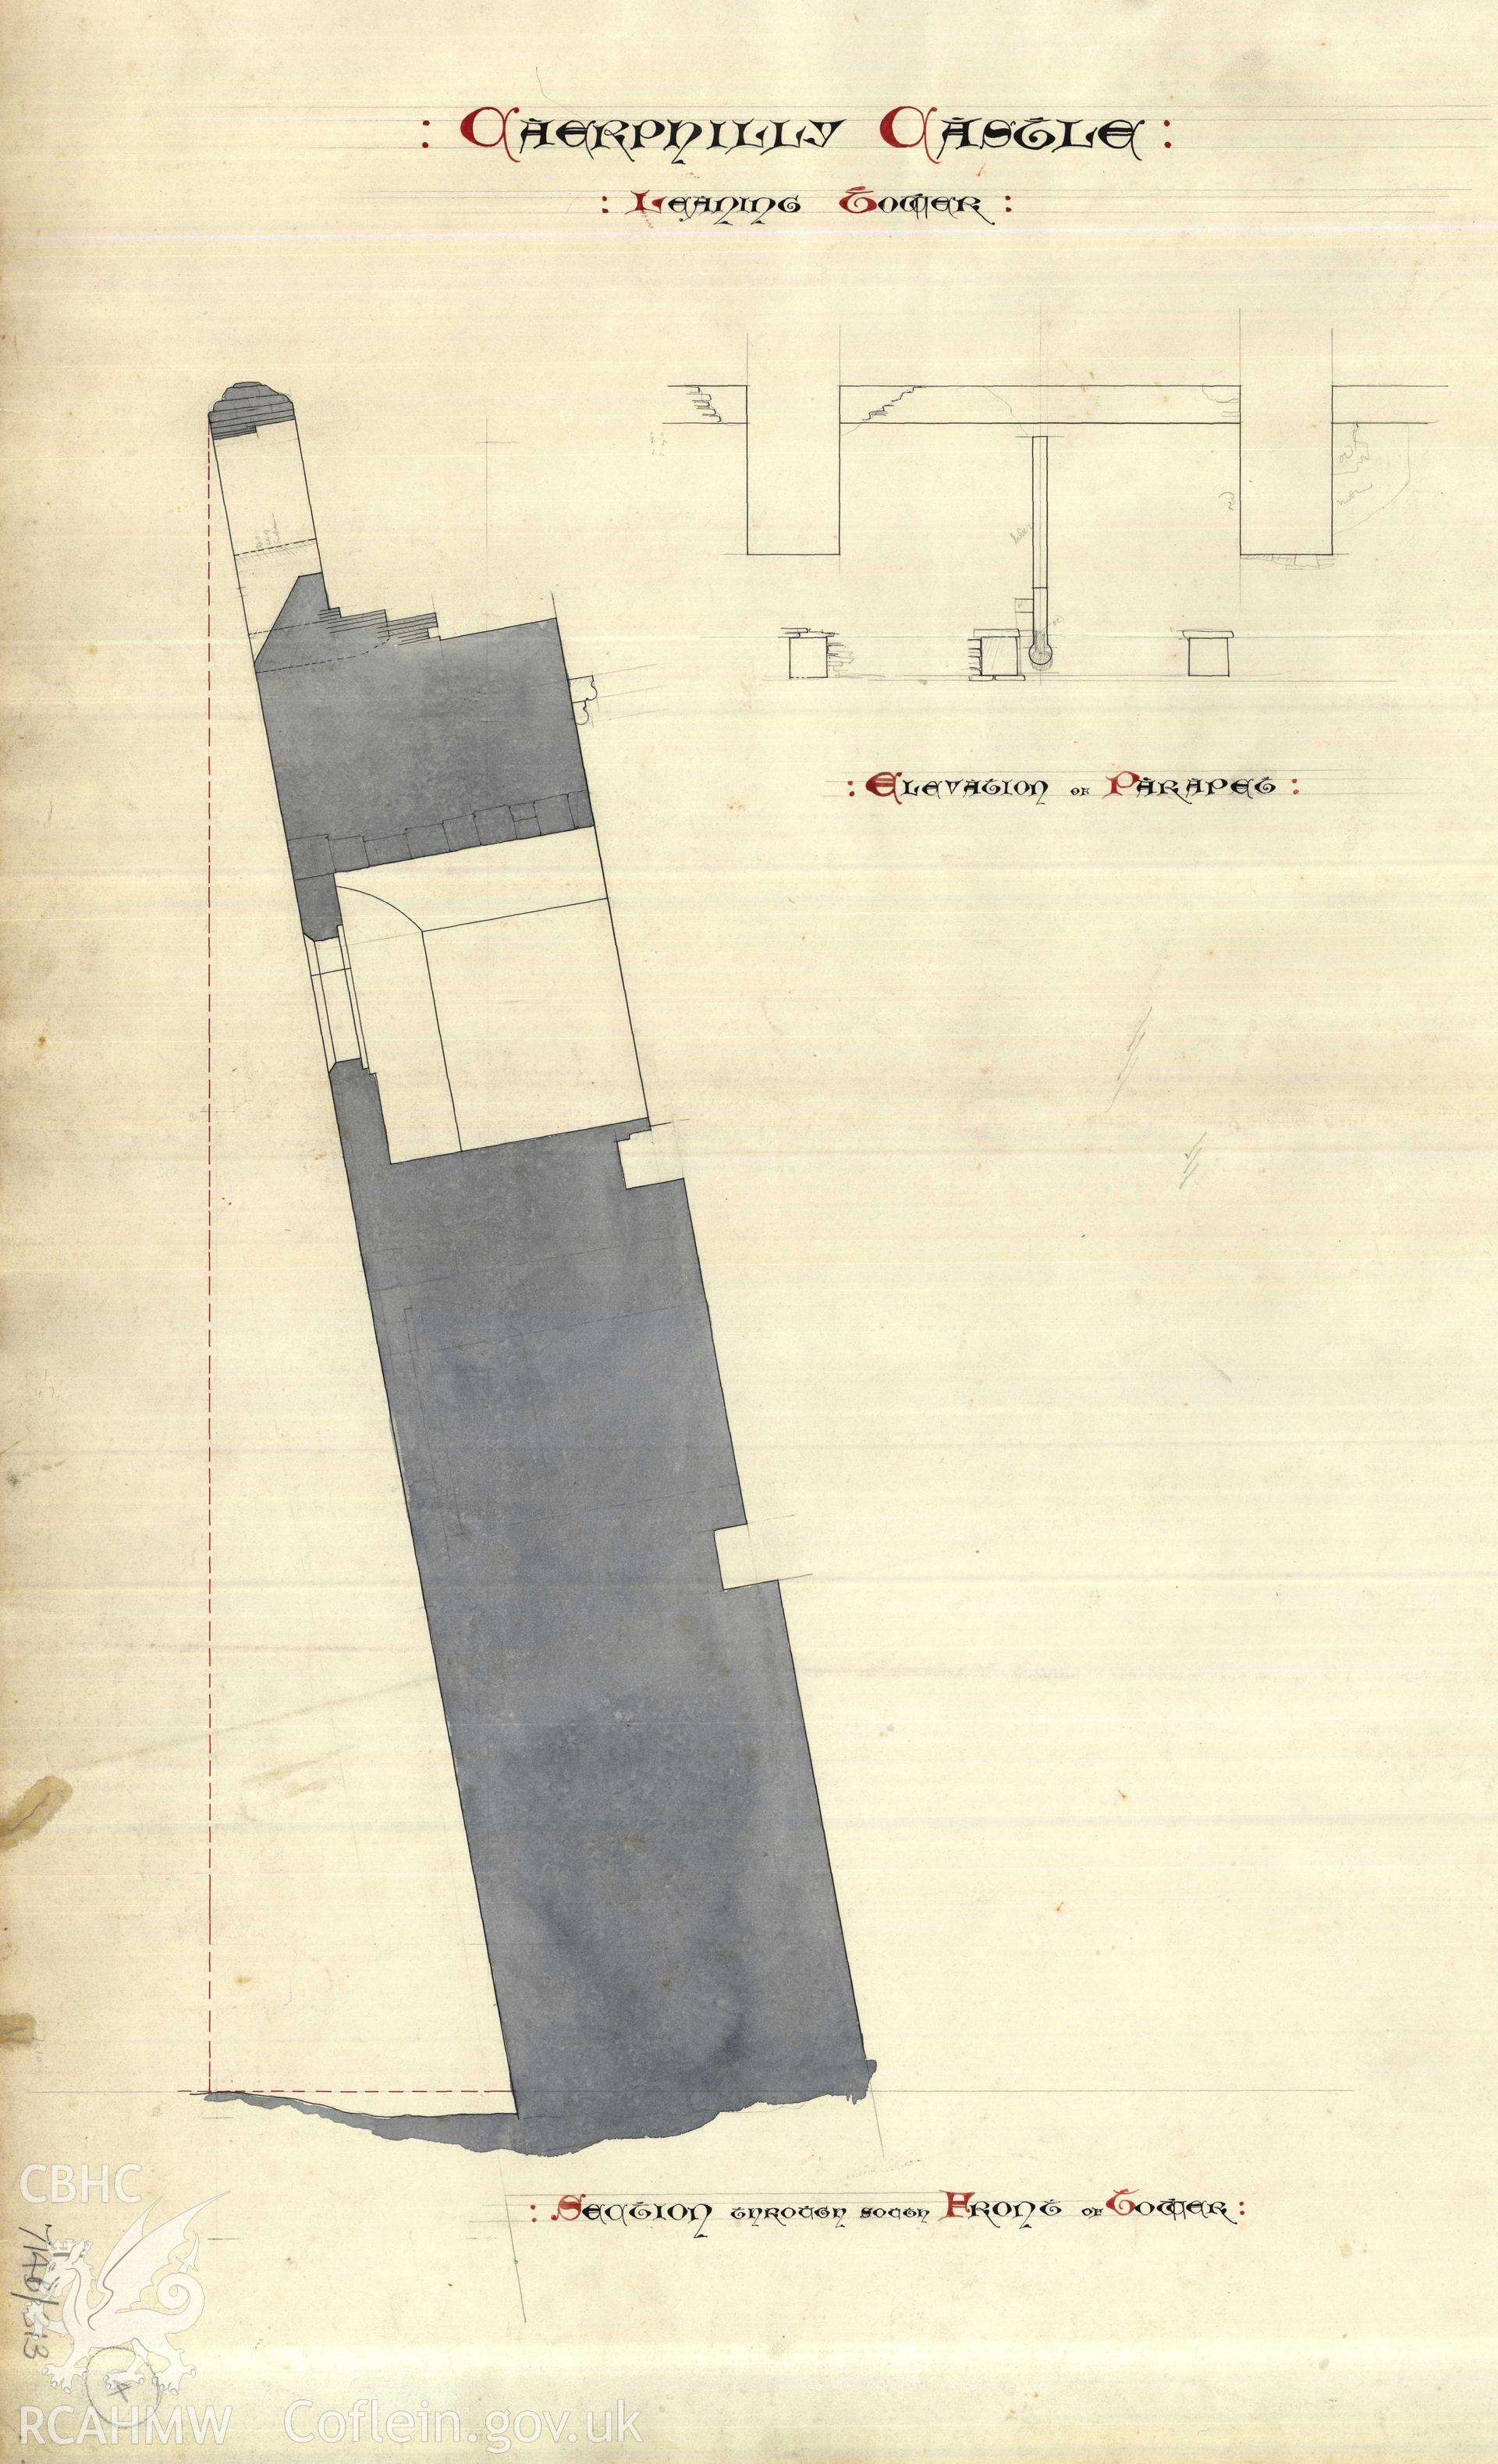 Cadw guardianship monument drawing of Caerphilly Castle. Section and elevation, Leaning Tower. Cadw Ref. No. 714B/313. No scale.